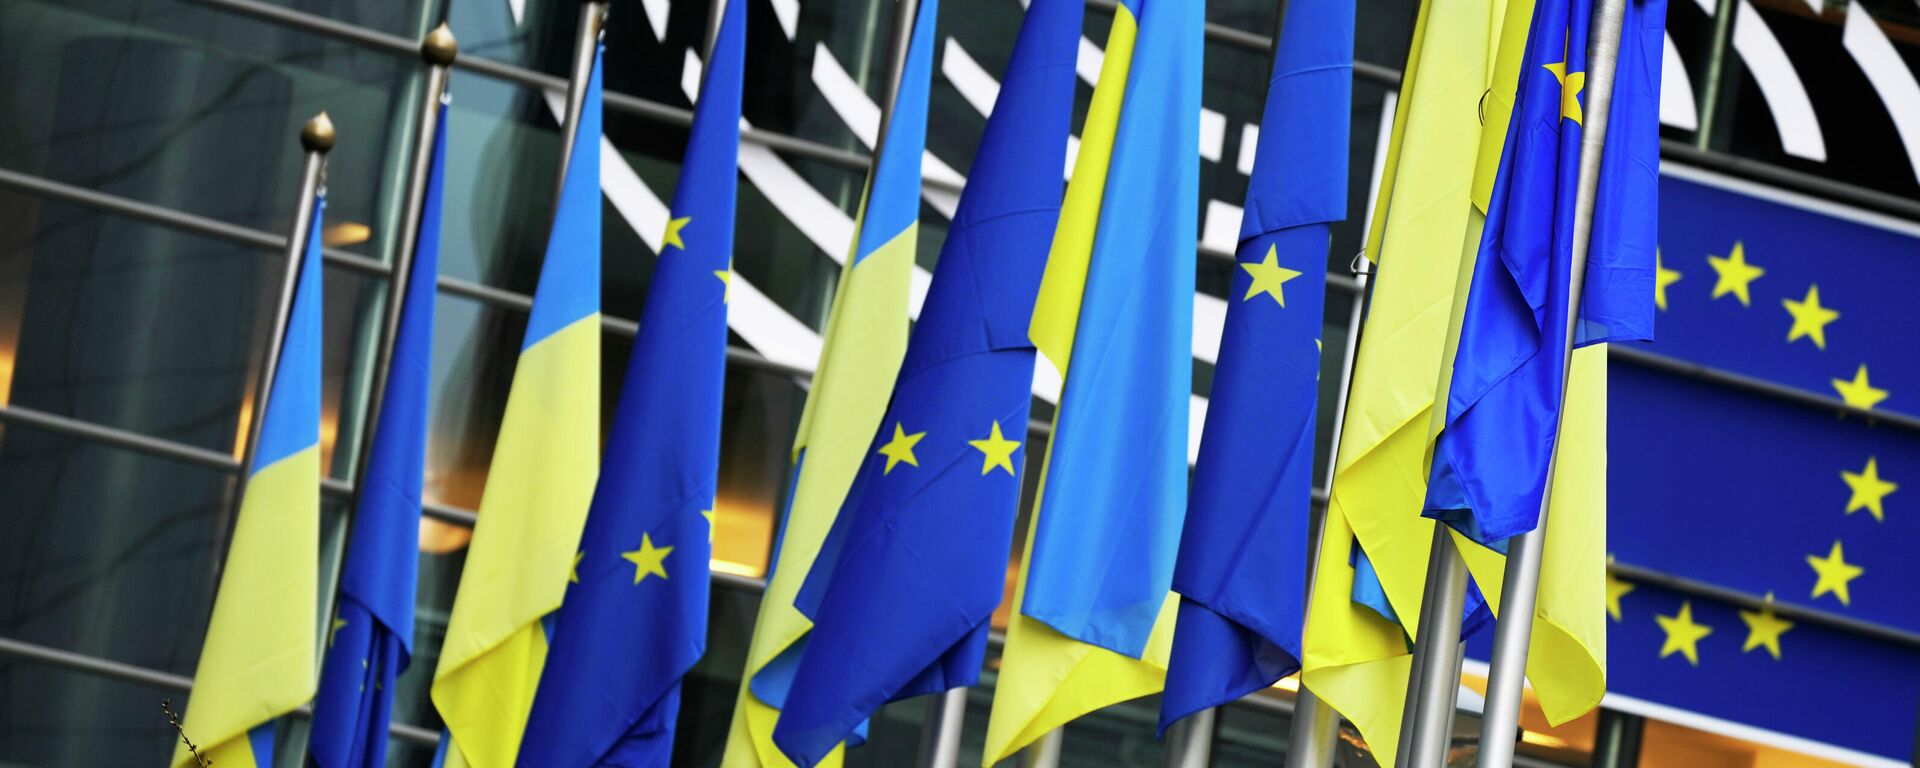 Ukraine and European Union flags hang together on the exterior of the building prior to an extraordinary plenary session on Ukraine at the European Parliament in Brussels, Tuesday, March 1, 2022 - Sputnik International, 1920, 17.06.2022